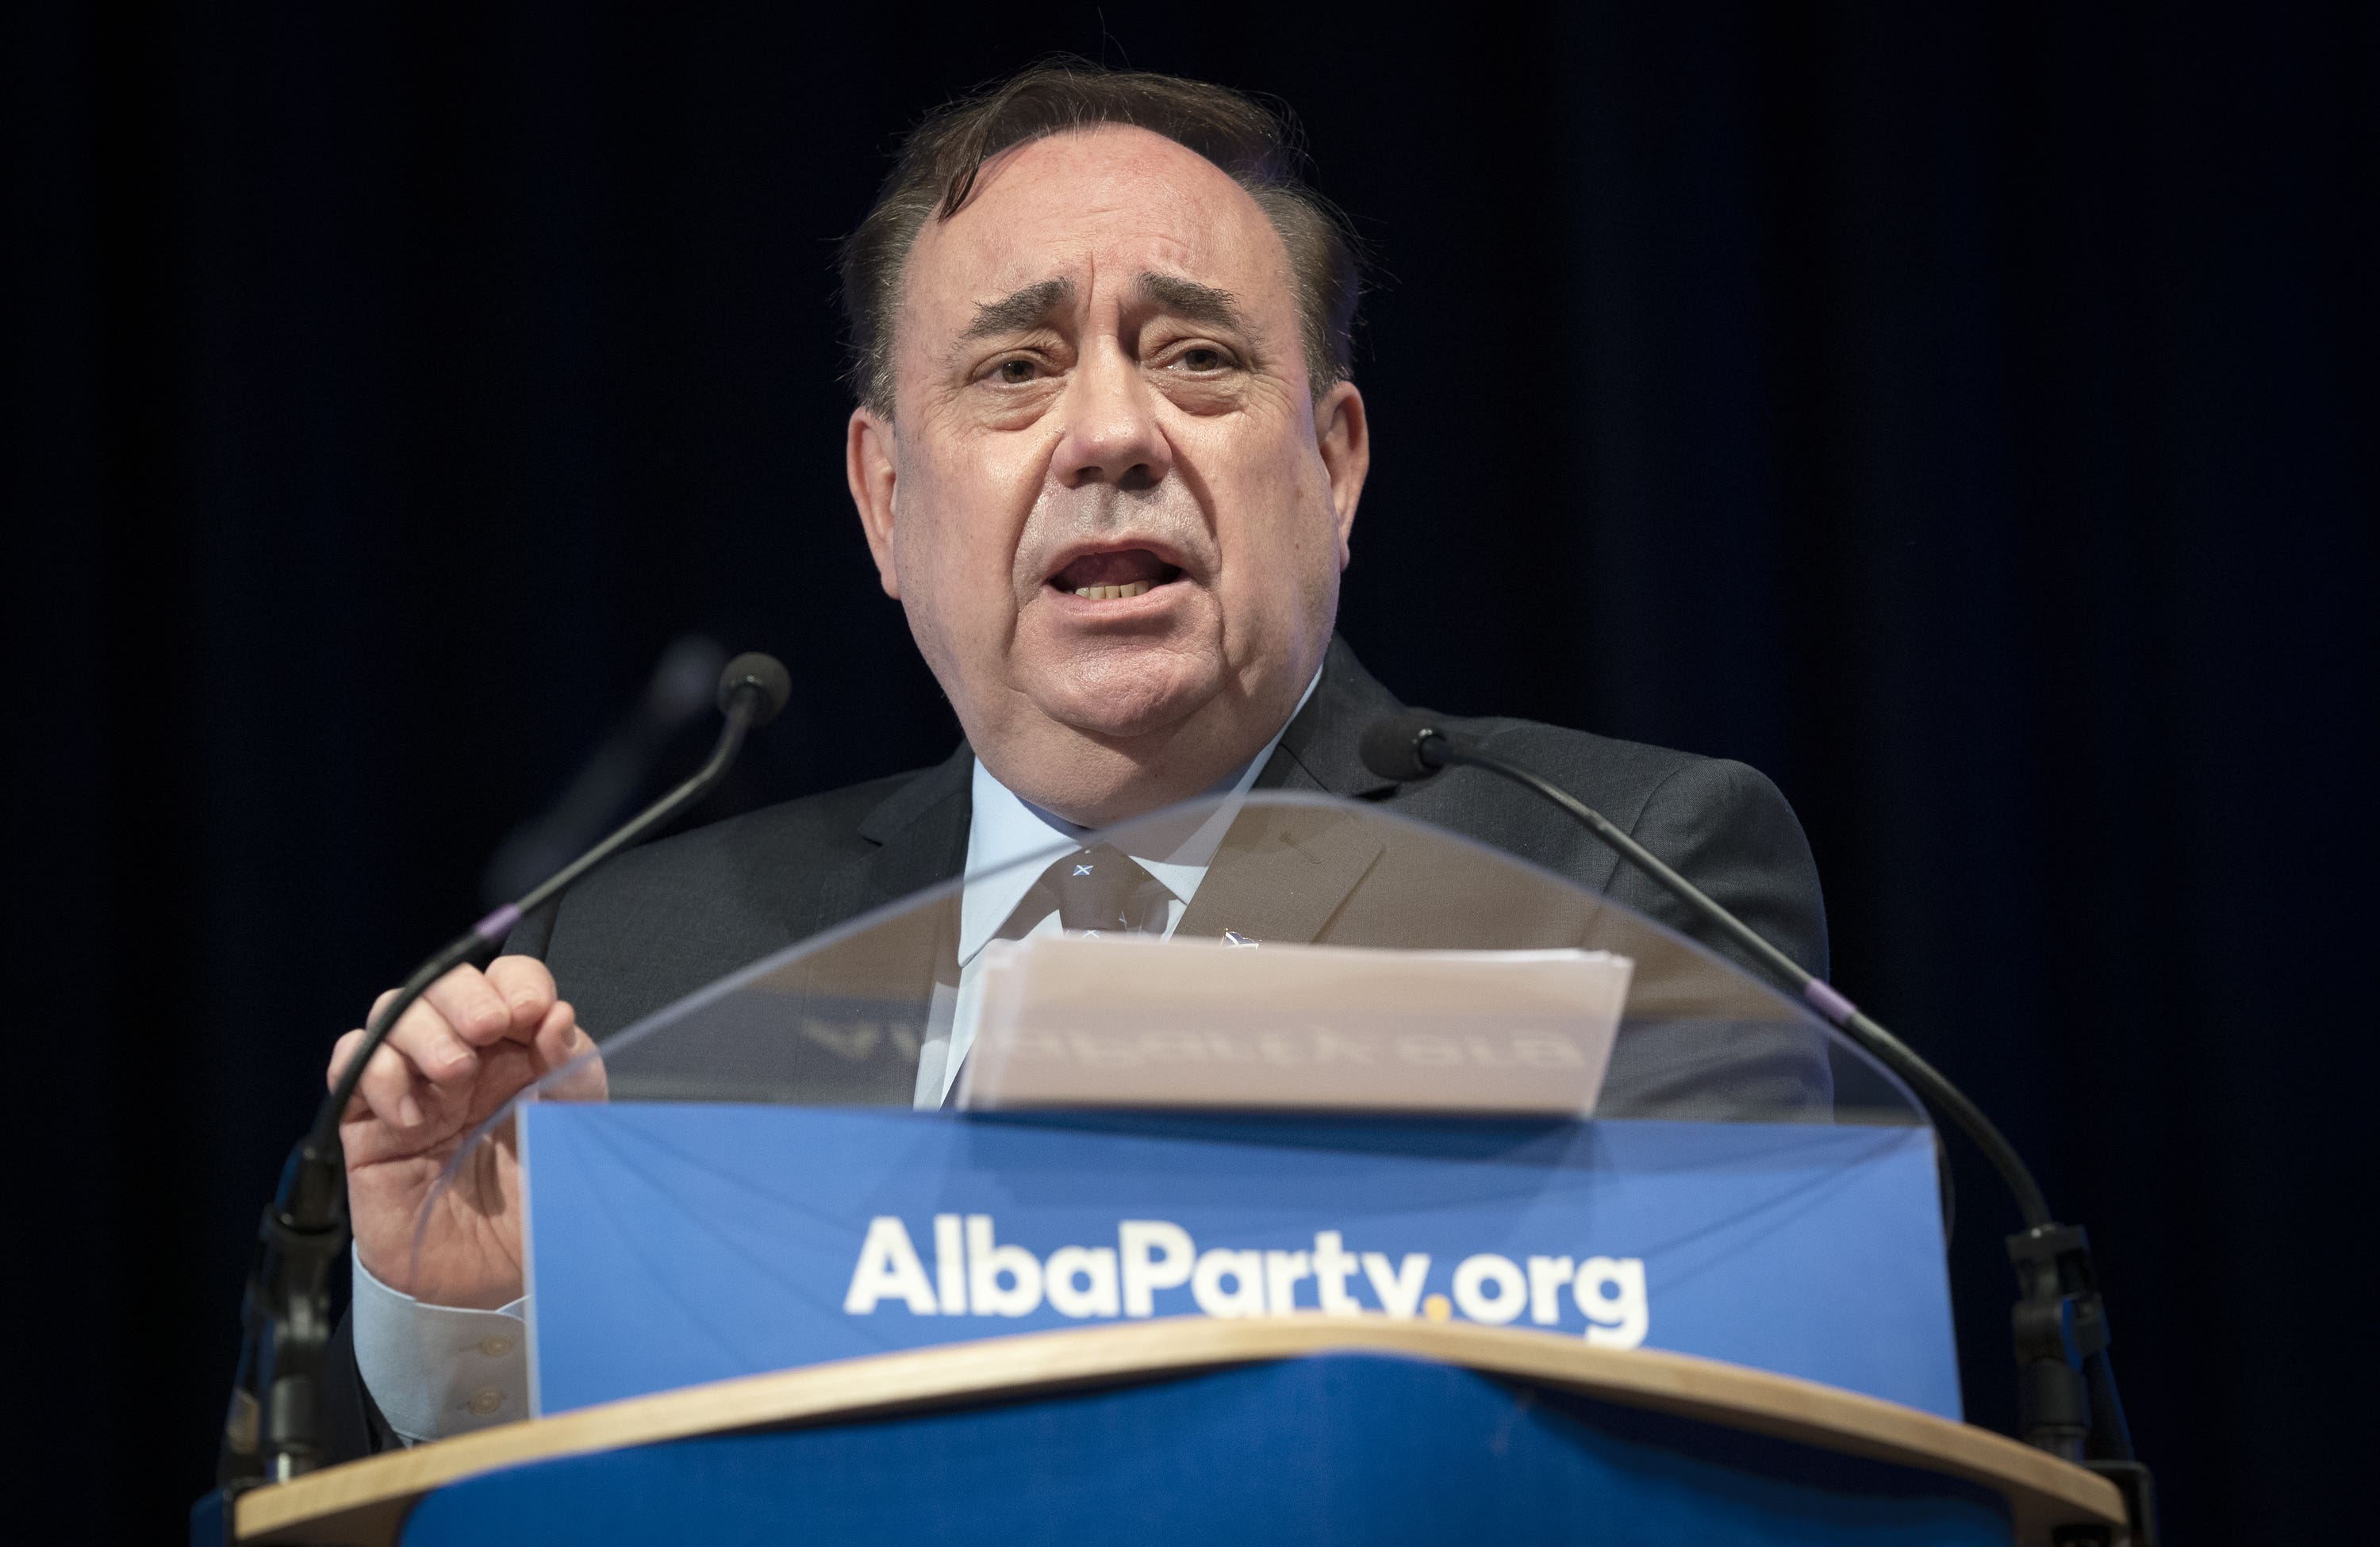 Alex Salmond will address Alba party members at the party’s spring conference